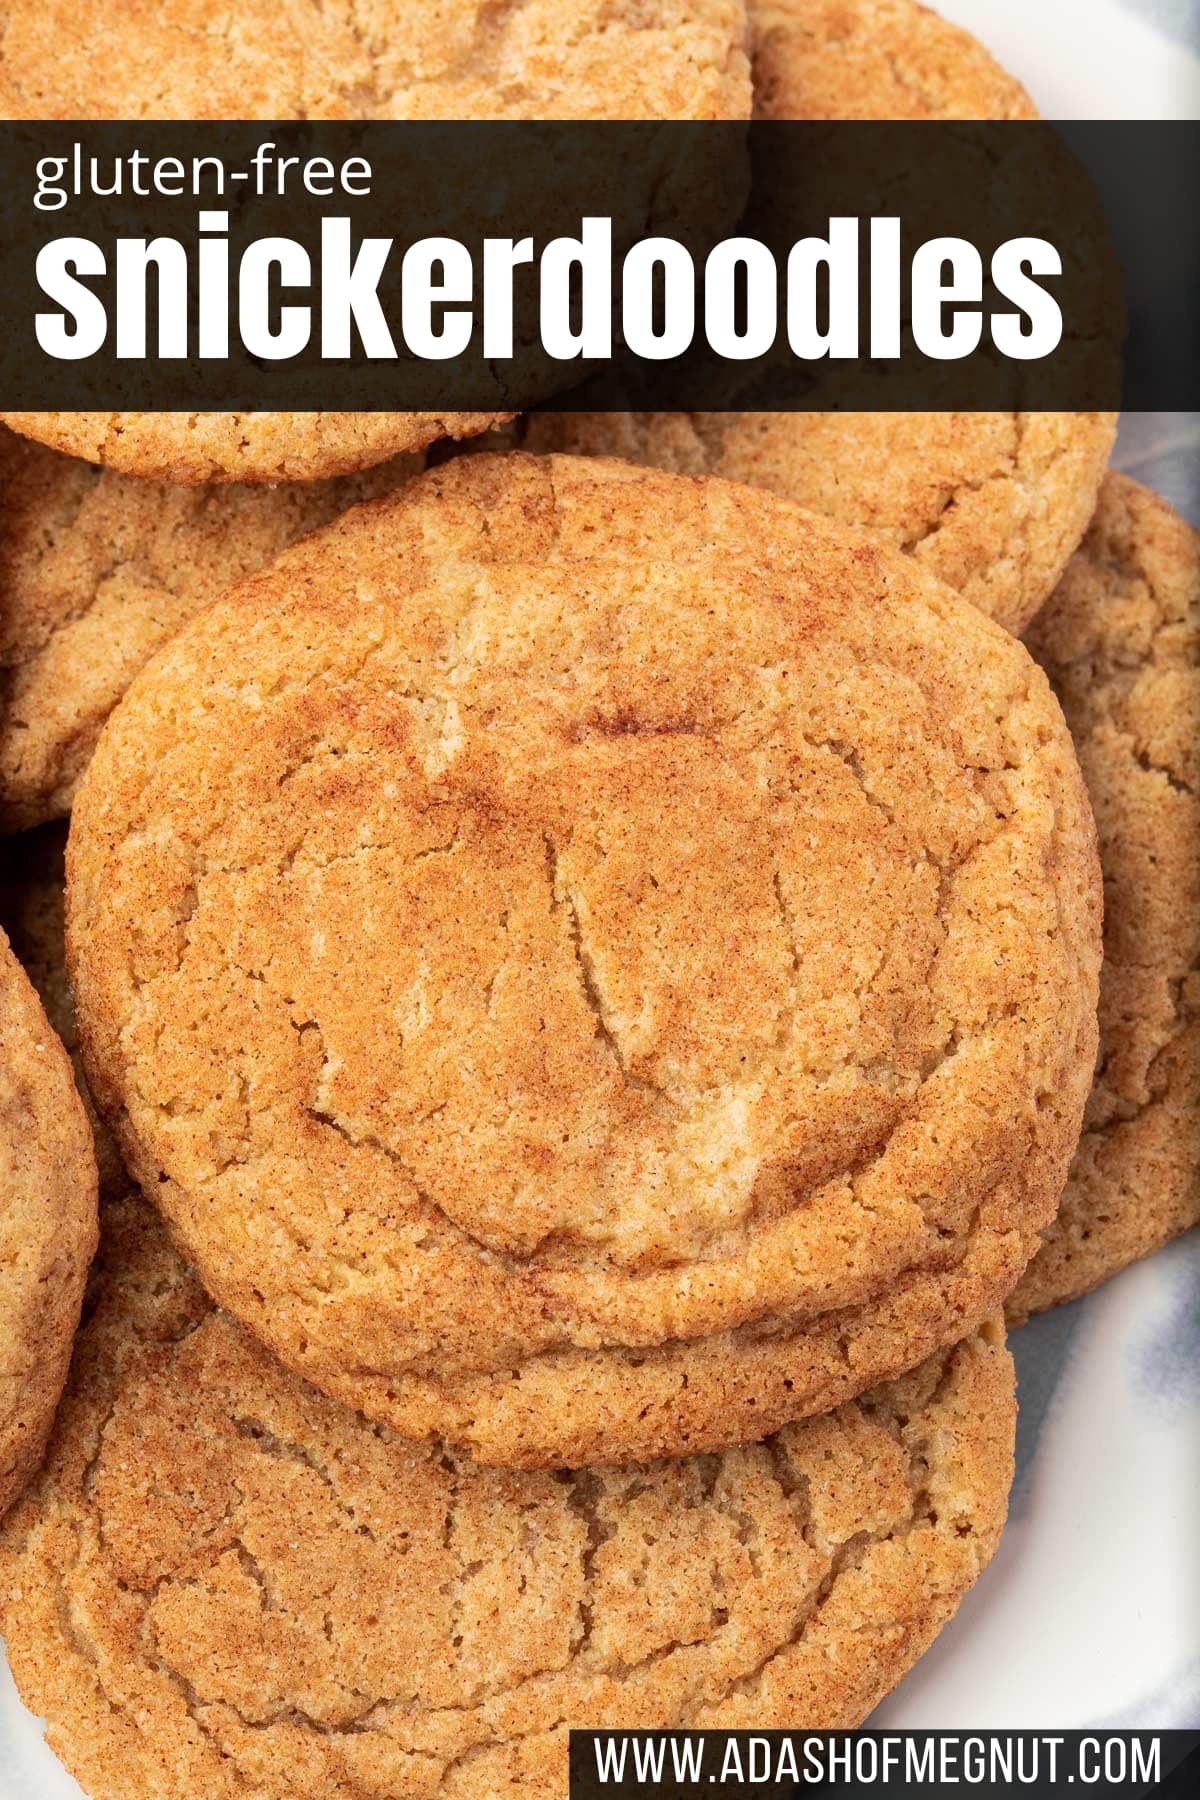 A closeup of a plate of gluten-free snickerdoodles on it with a text overlay.